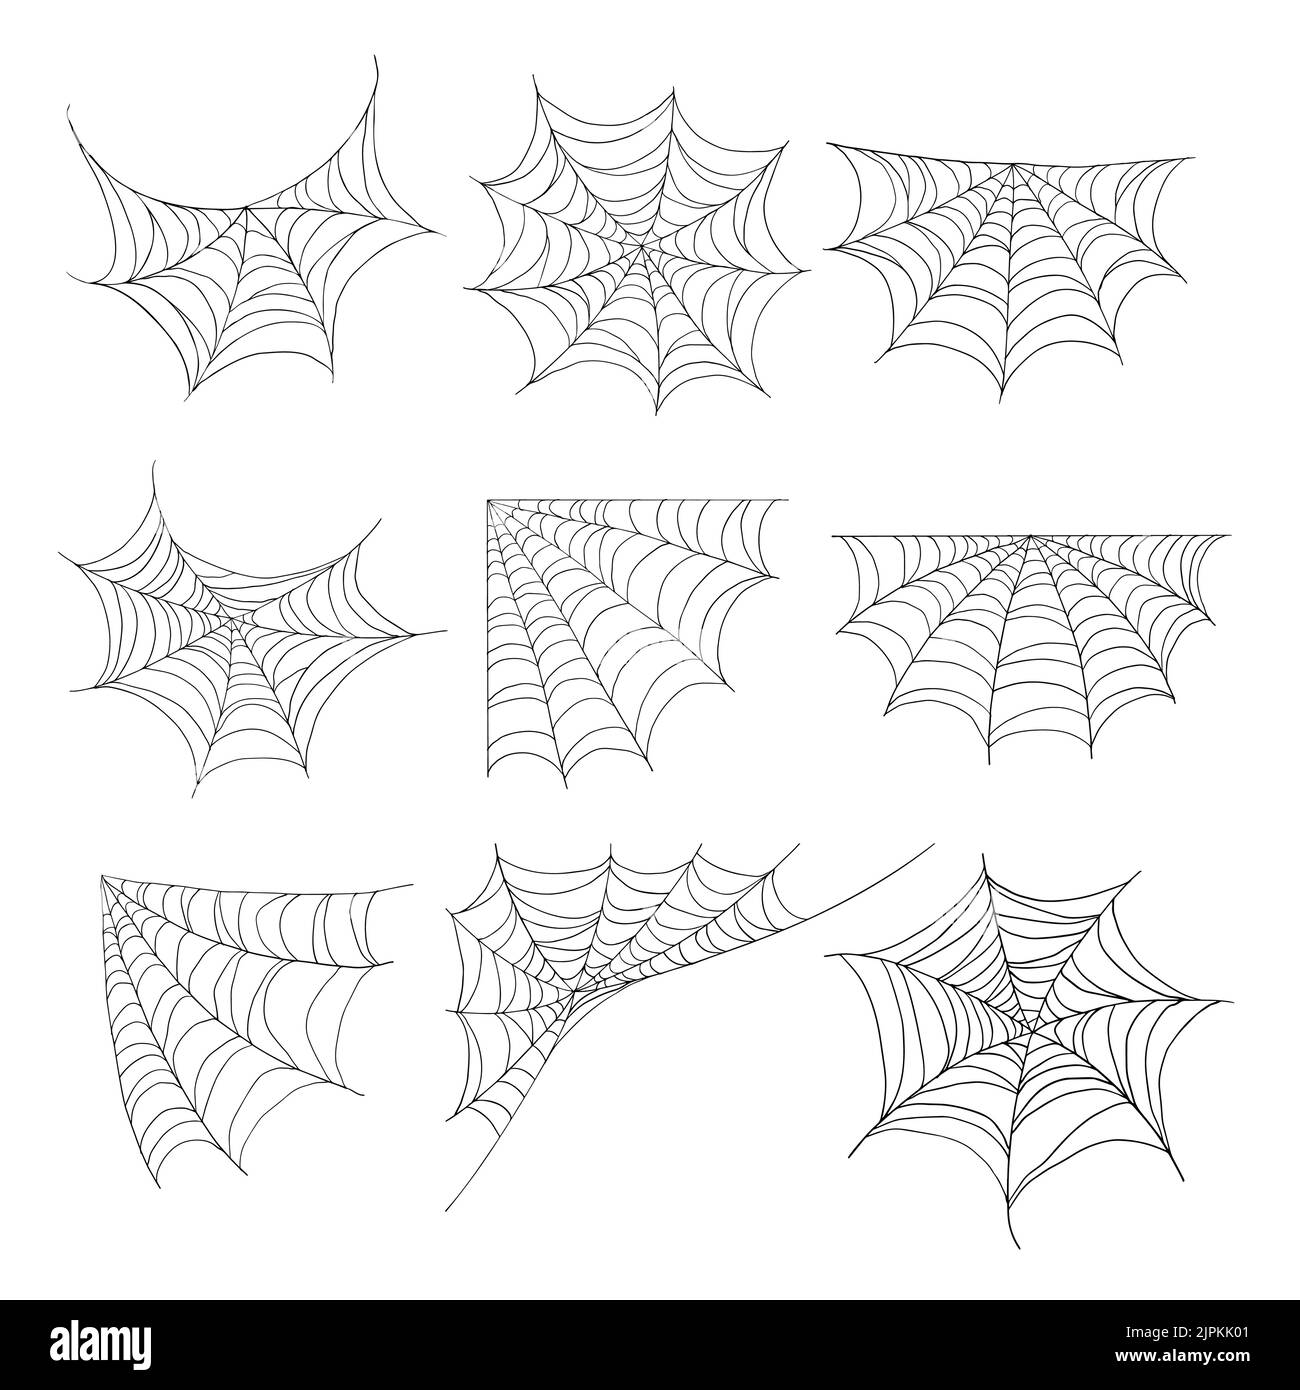 spider web for halloween and cobweb elements decoration isolated on white background. Stock Vector